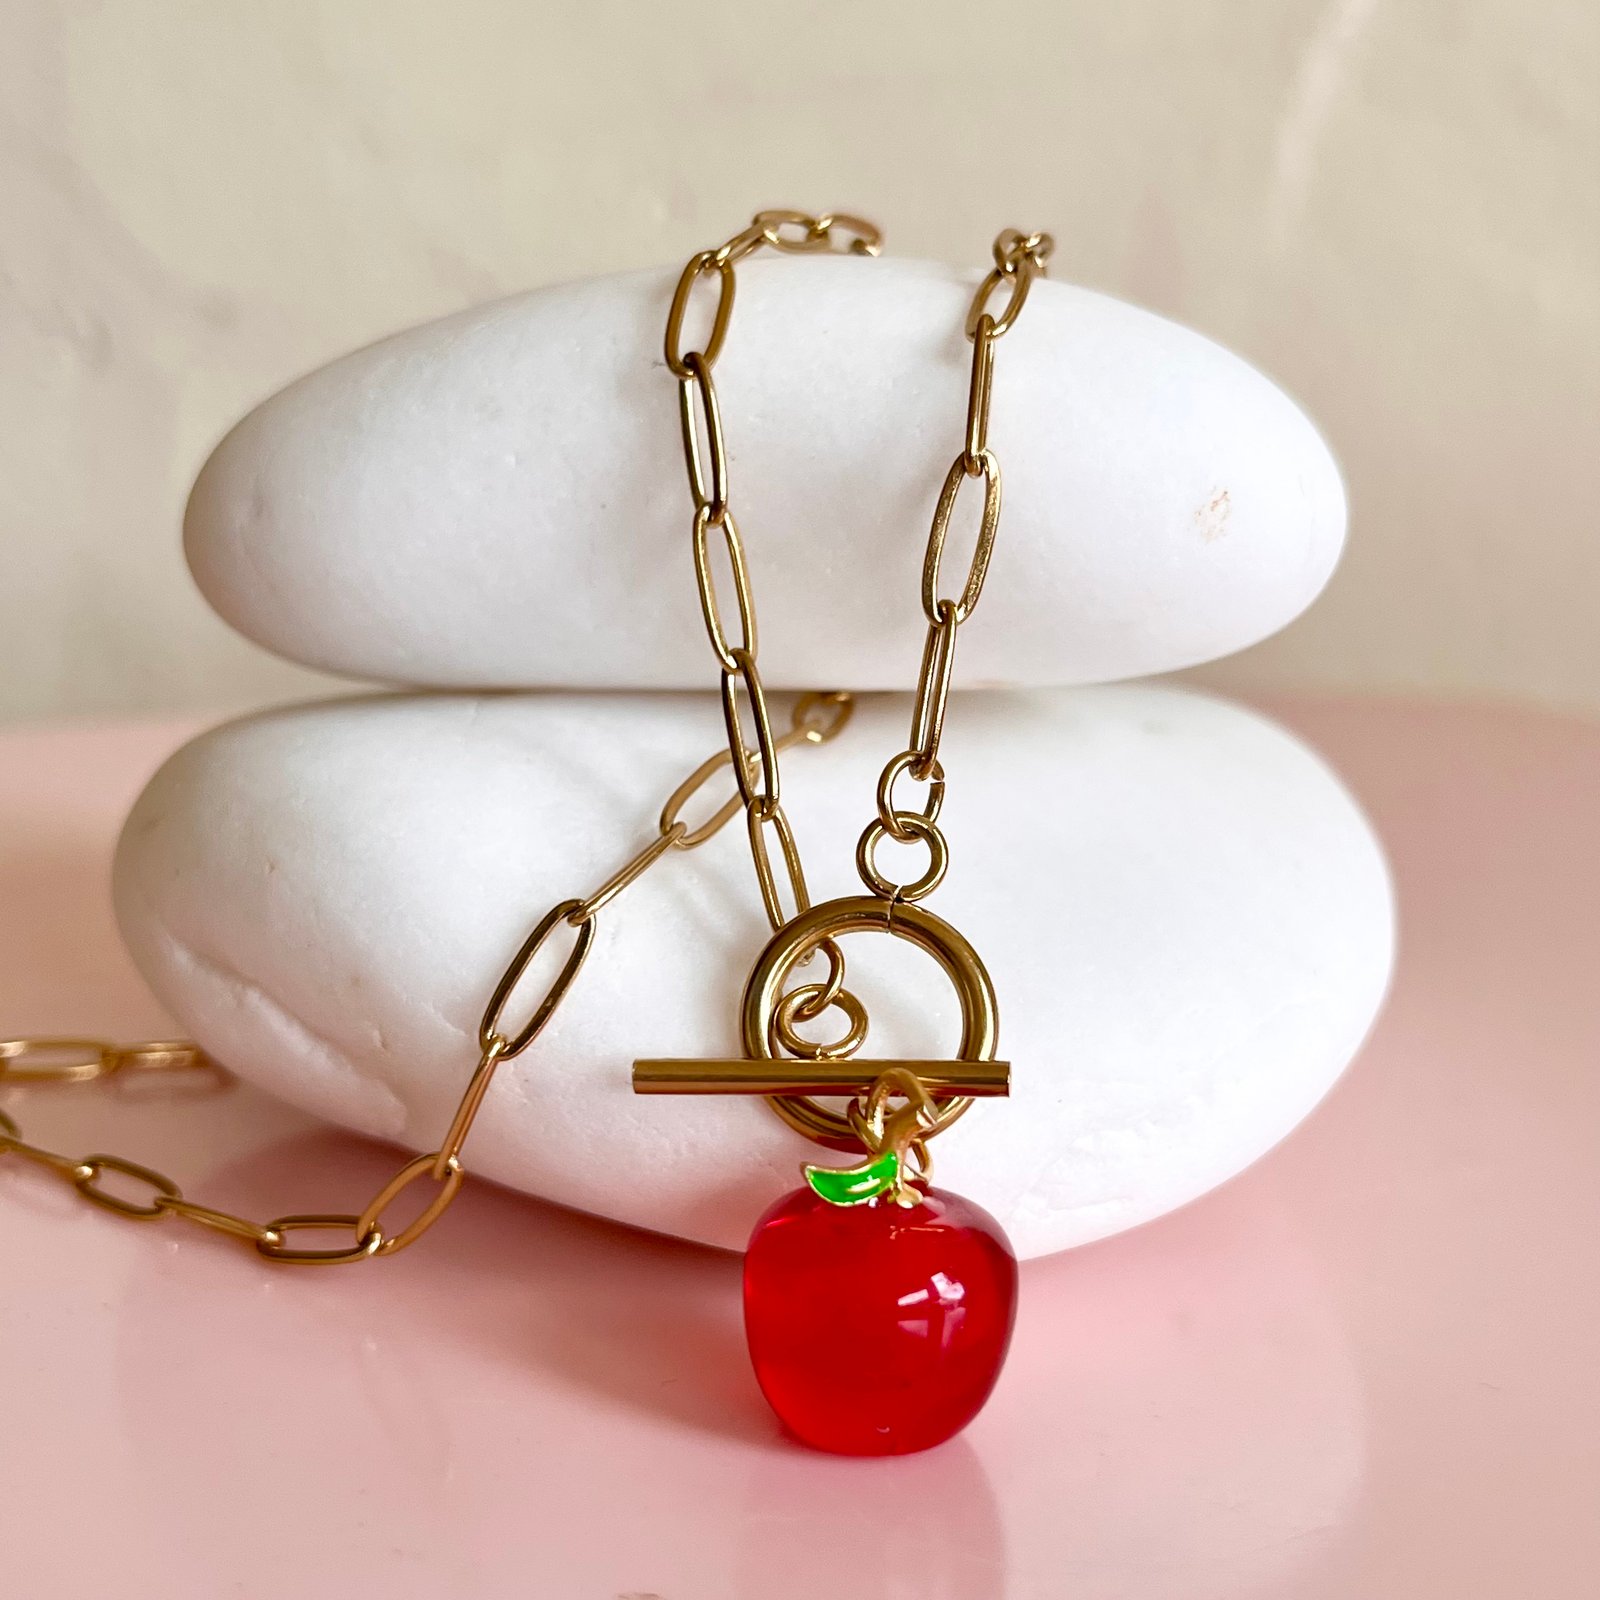 Eve's Apple Necklace – Good Being a Girl